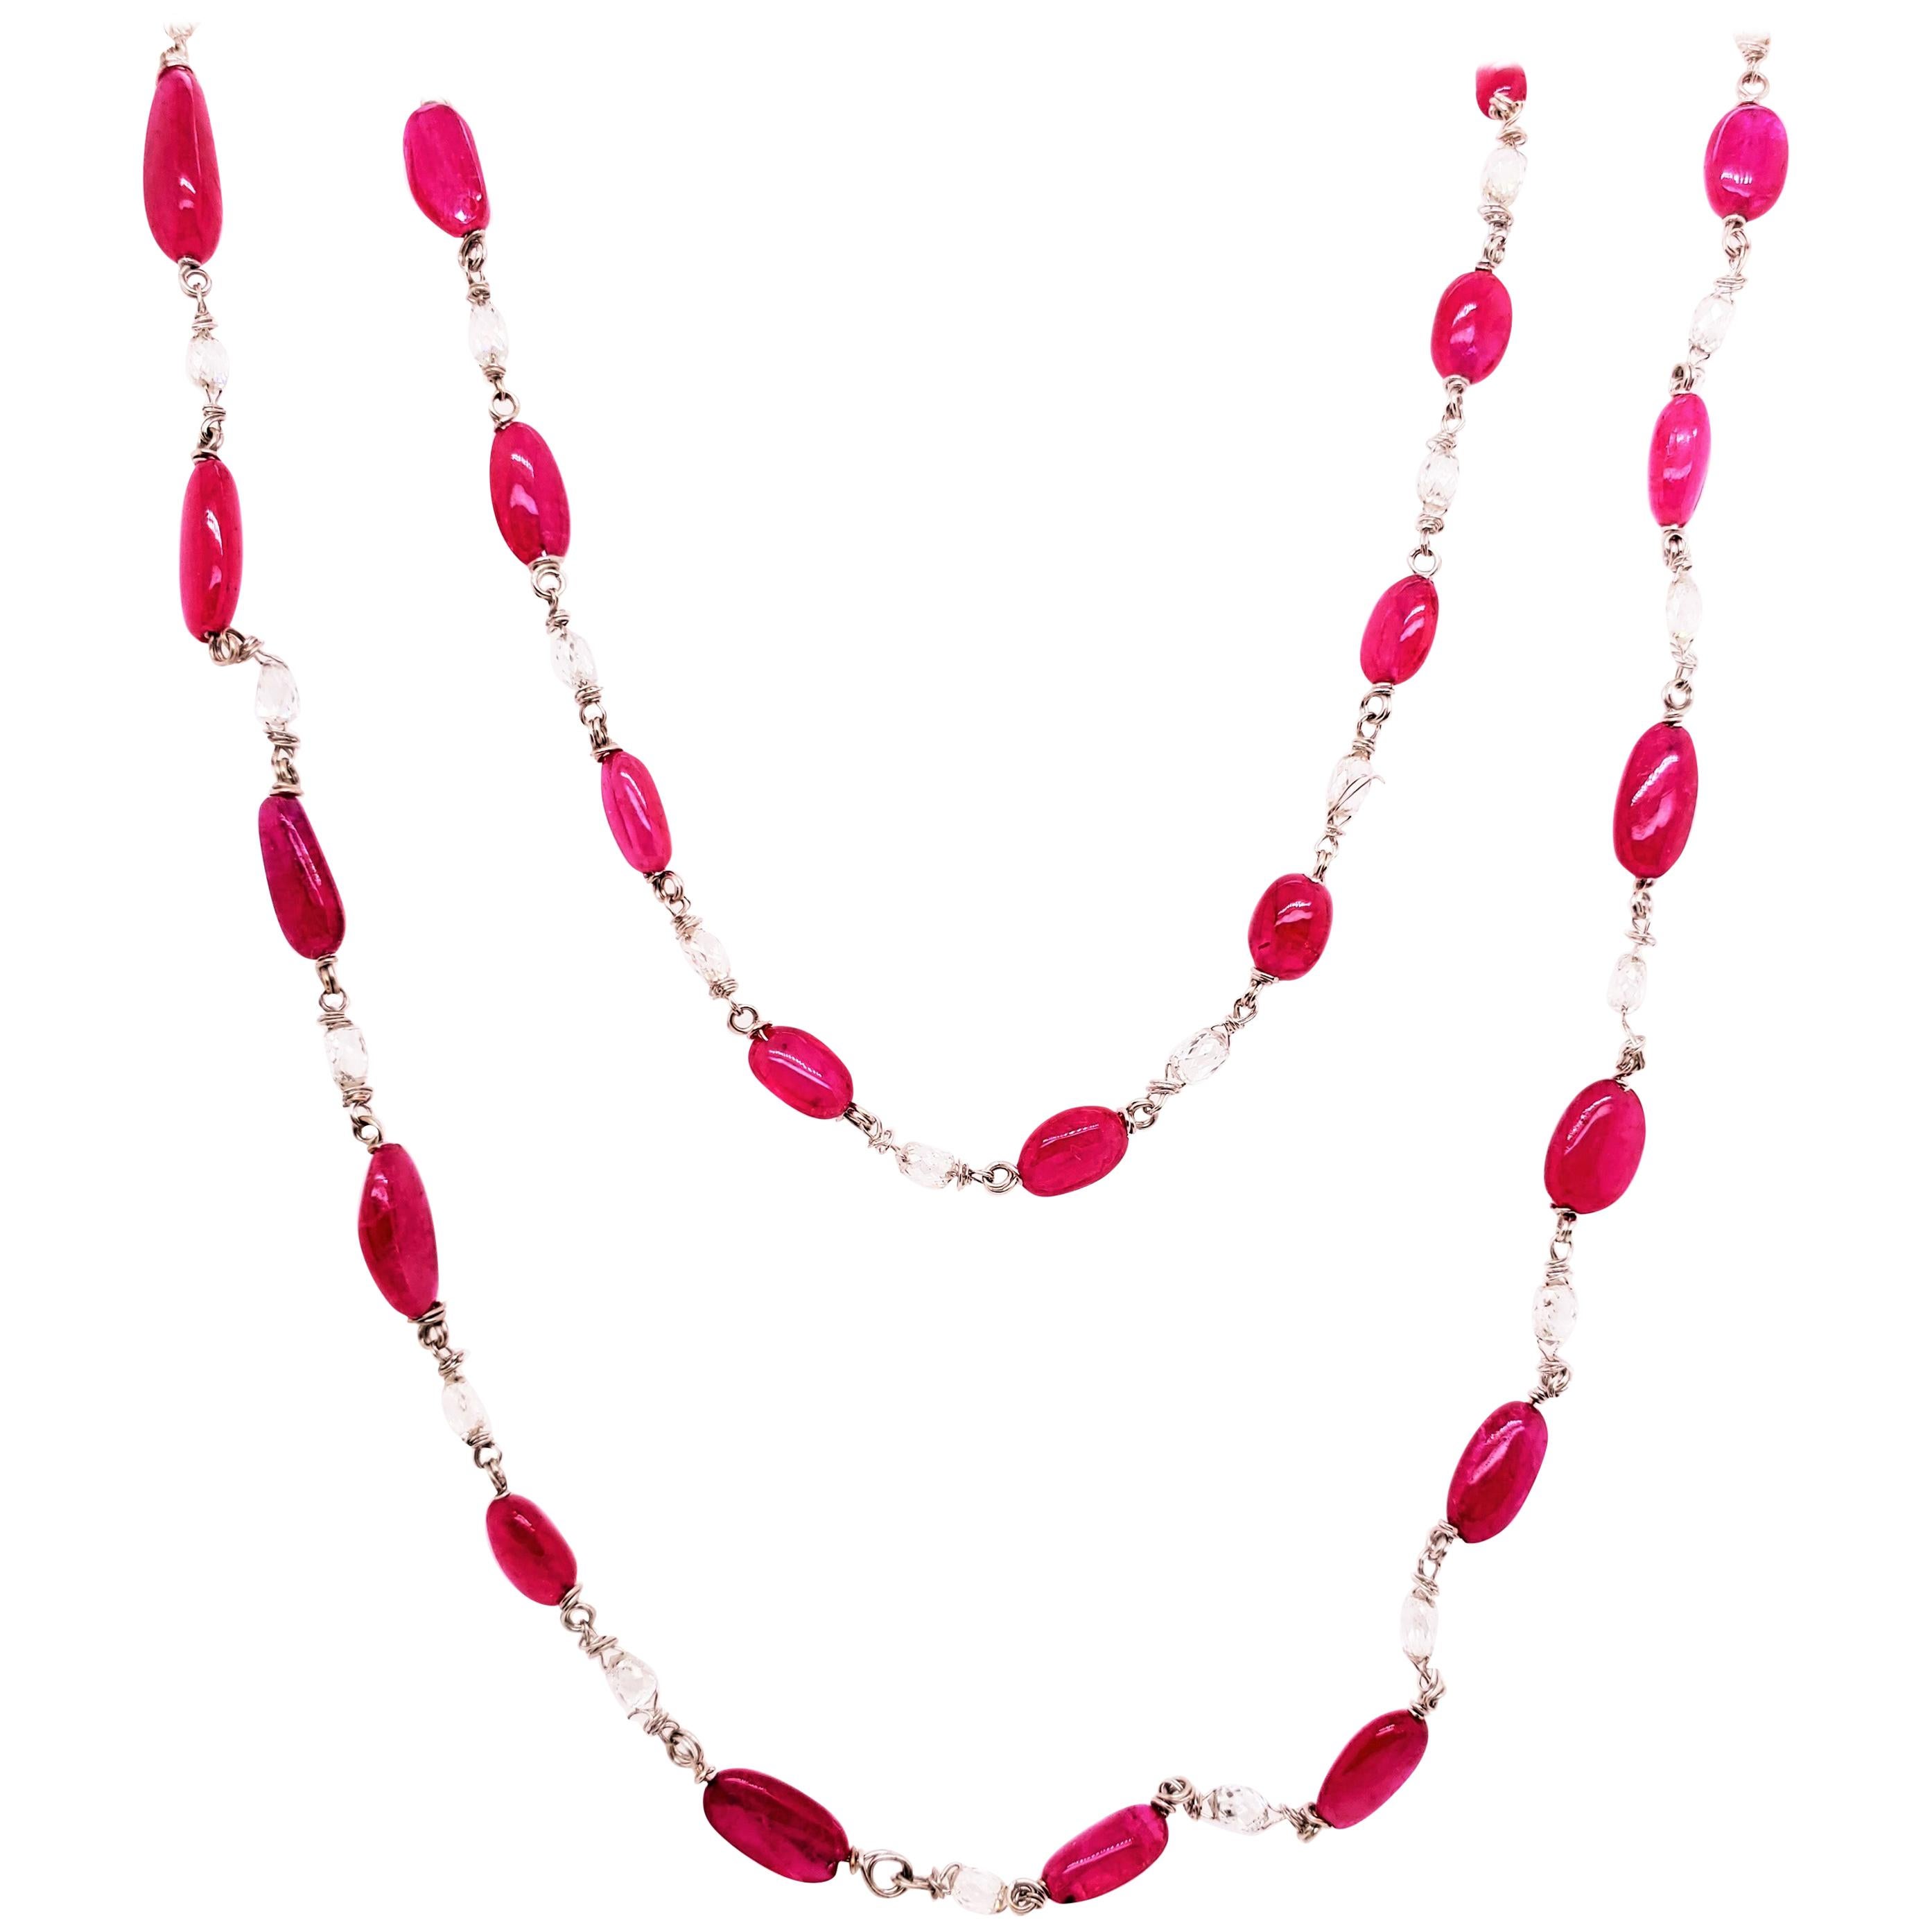 Vivid Red Ruby Beads and Diamond Briolette White Gold Necklace